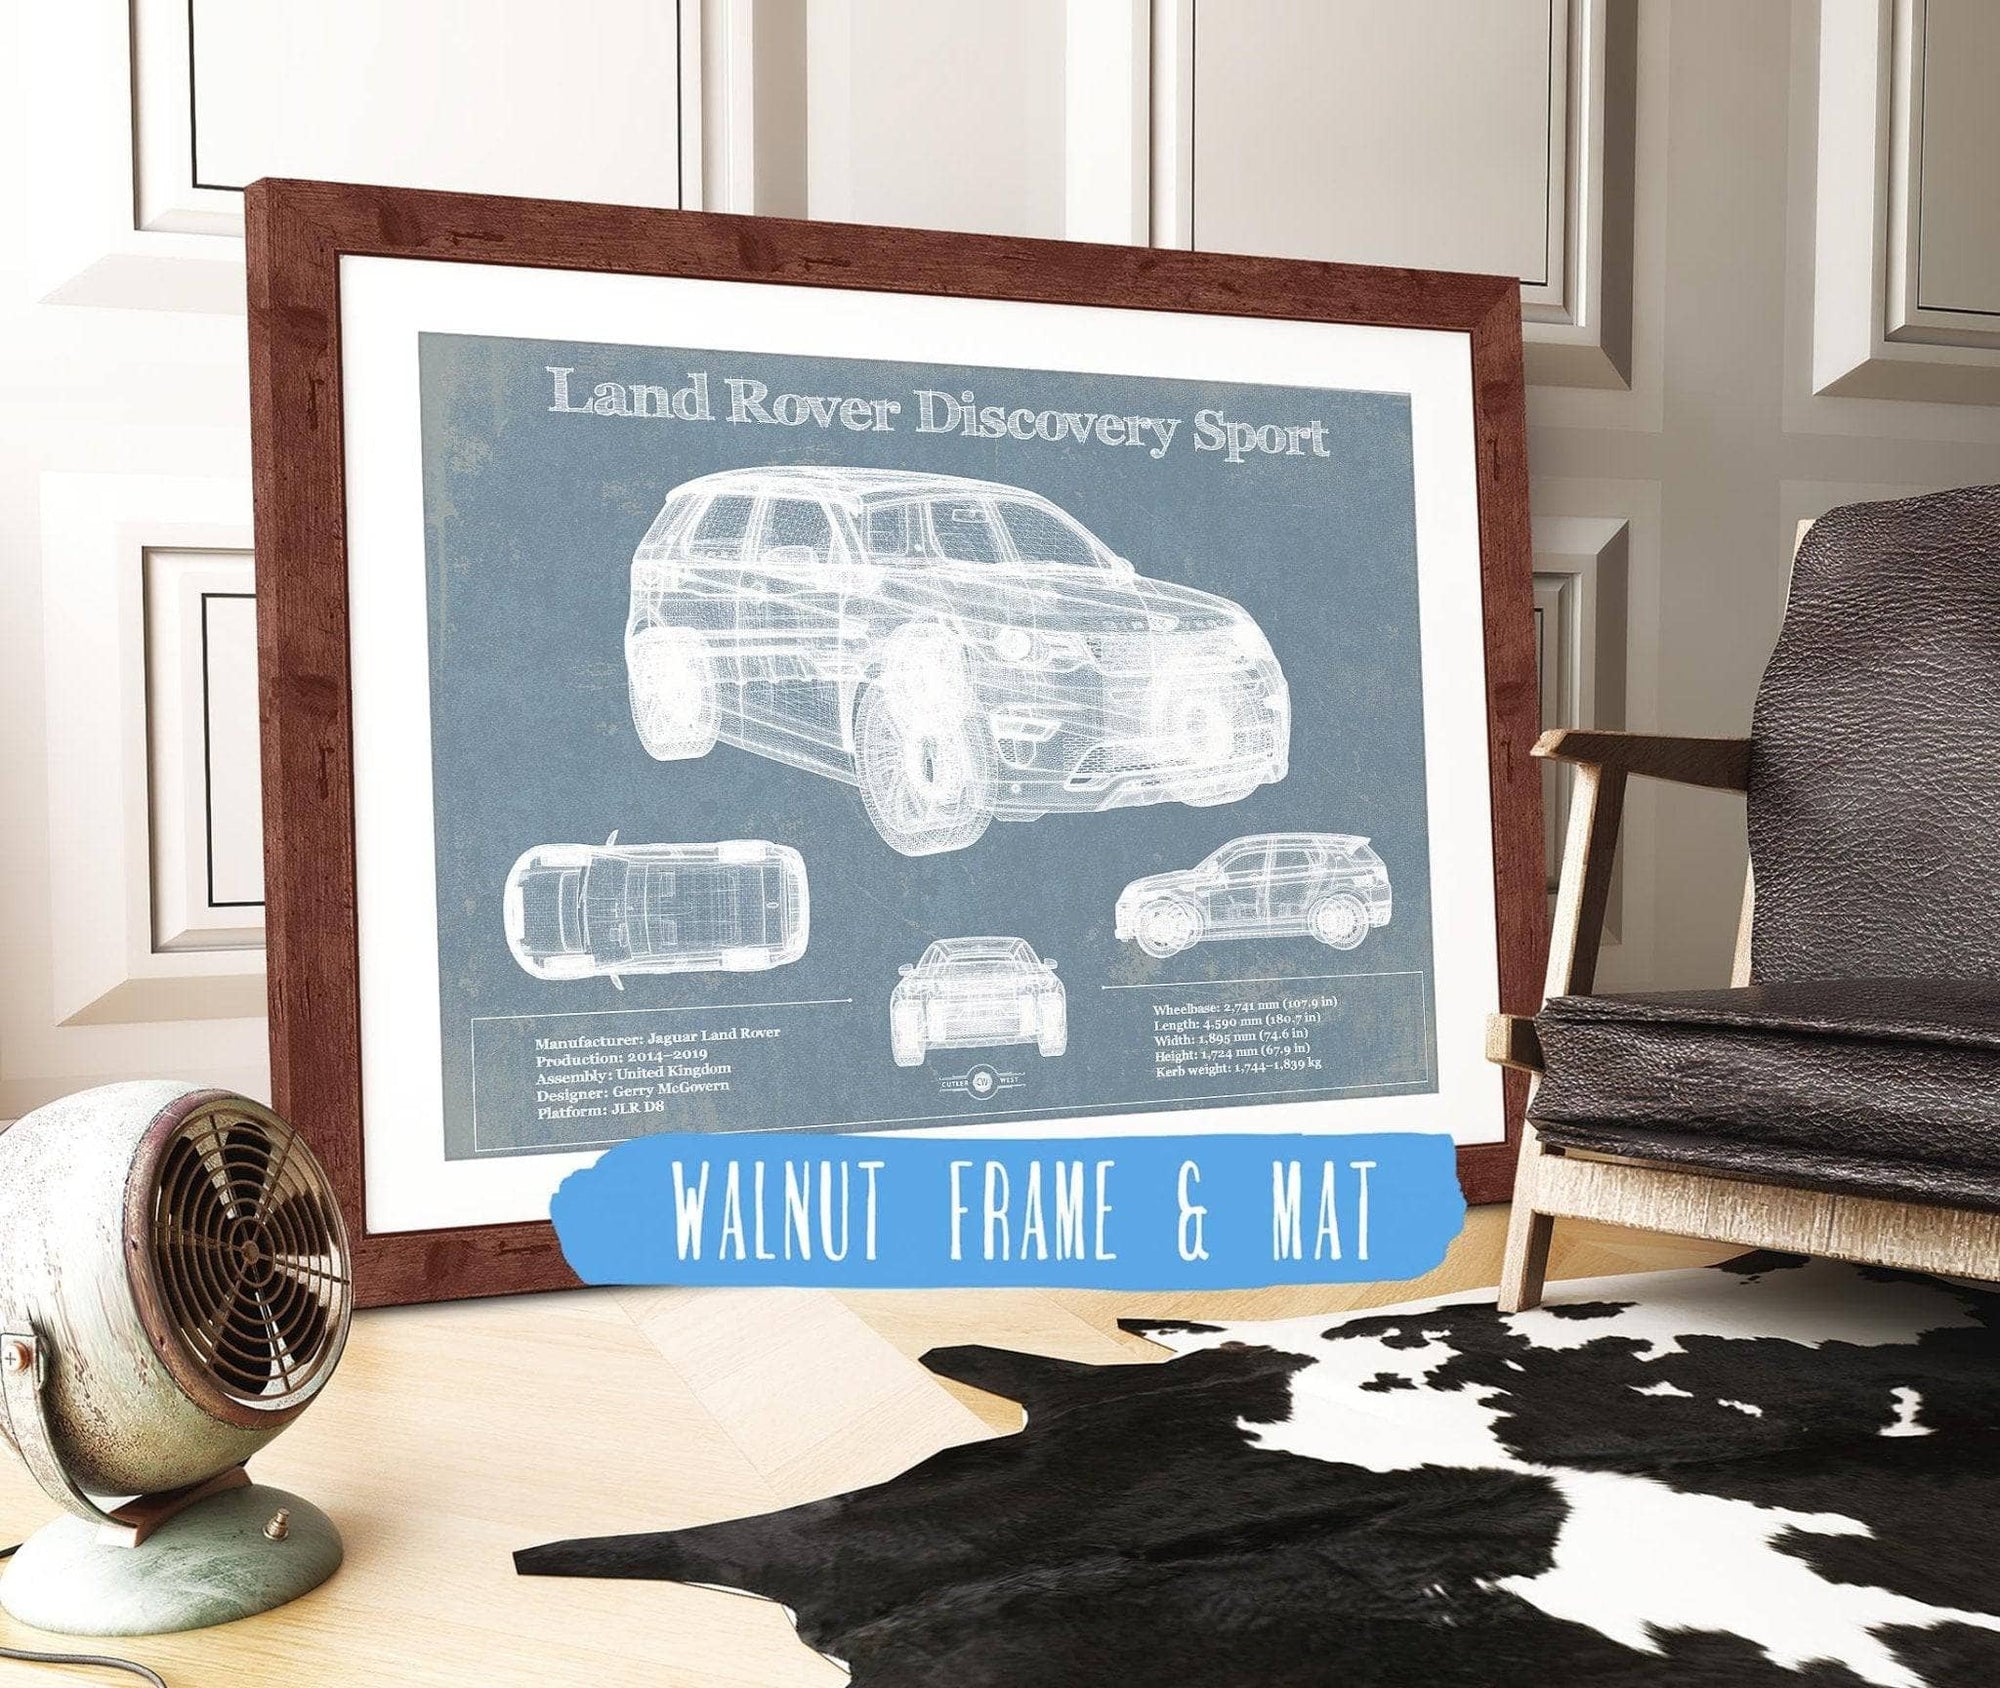 Cutler West Land Rover Collection 14" x 11" / Walnut Frame & Mat Land Rover Discovery Sport Vintage Blueprint Auto Print 845000277_15834